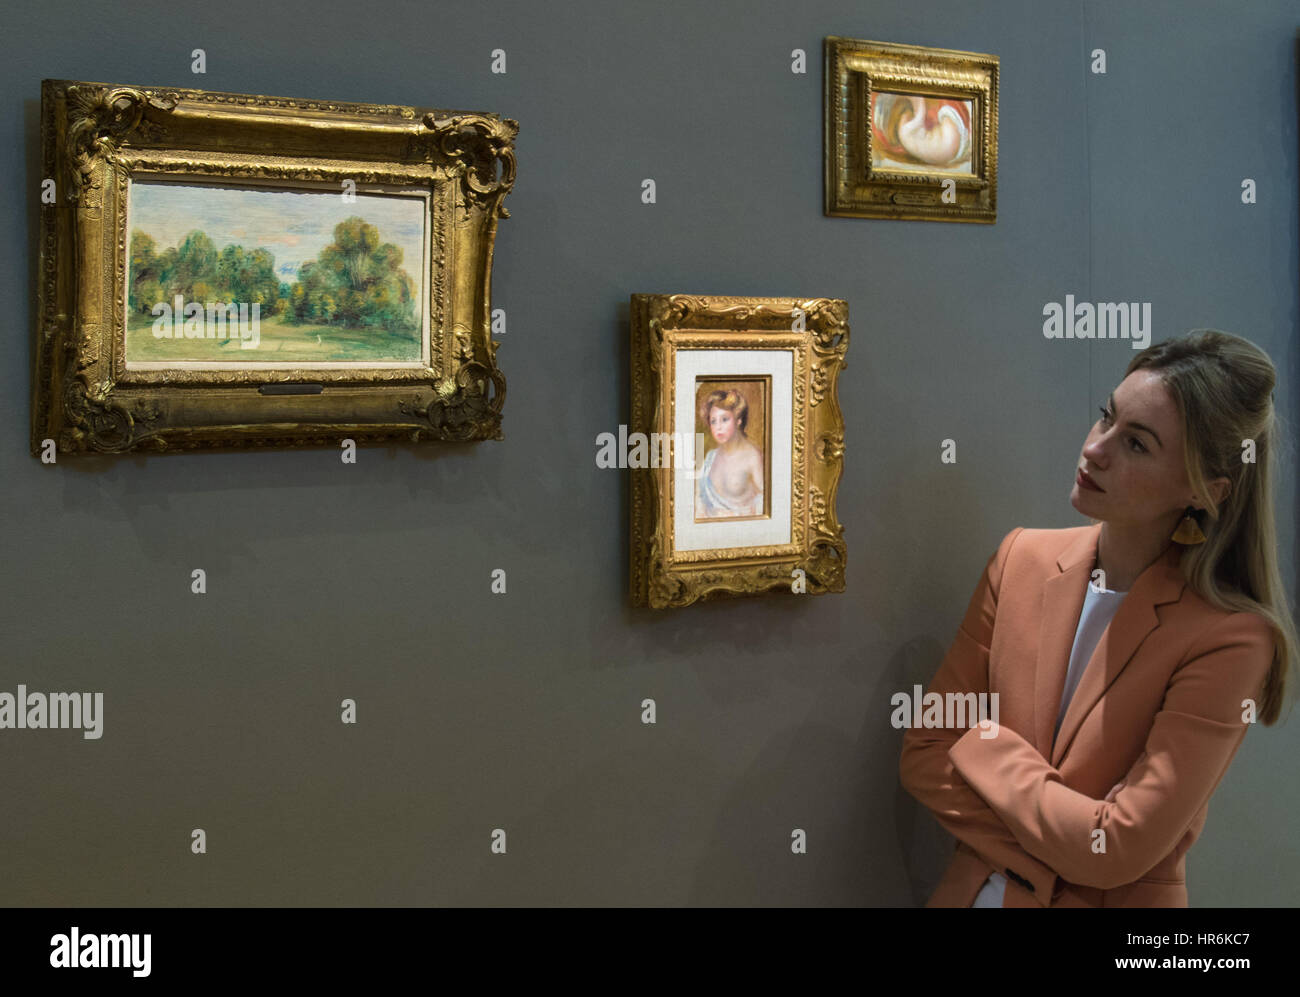 Bonhams, London, February 27th 2017. A woman admires three small paintings by Augustine Renoir including Jeune femme en buste (£150,000-200,000), 'Nu Allongé' (£40,000-80,000) and La party de tennis (£70,000-100,000) at the Bonhams impressionist and modern art sale press preview at their Mayfair gallery in London. Credit: Paul Davey/Alamy Live News Stock Photo